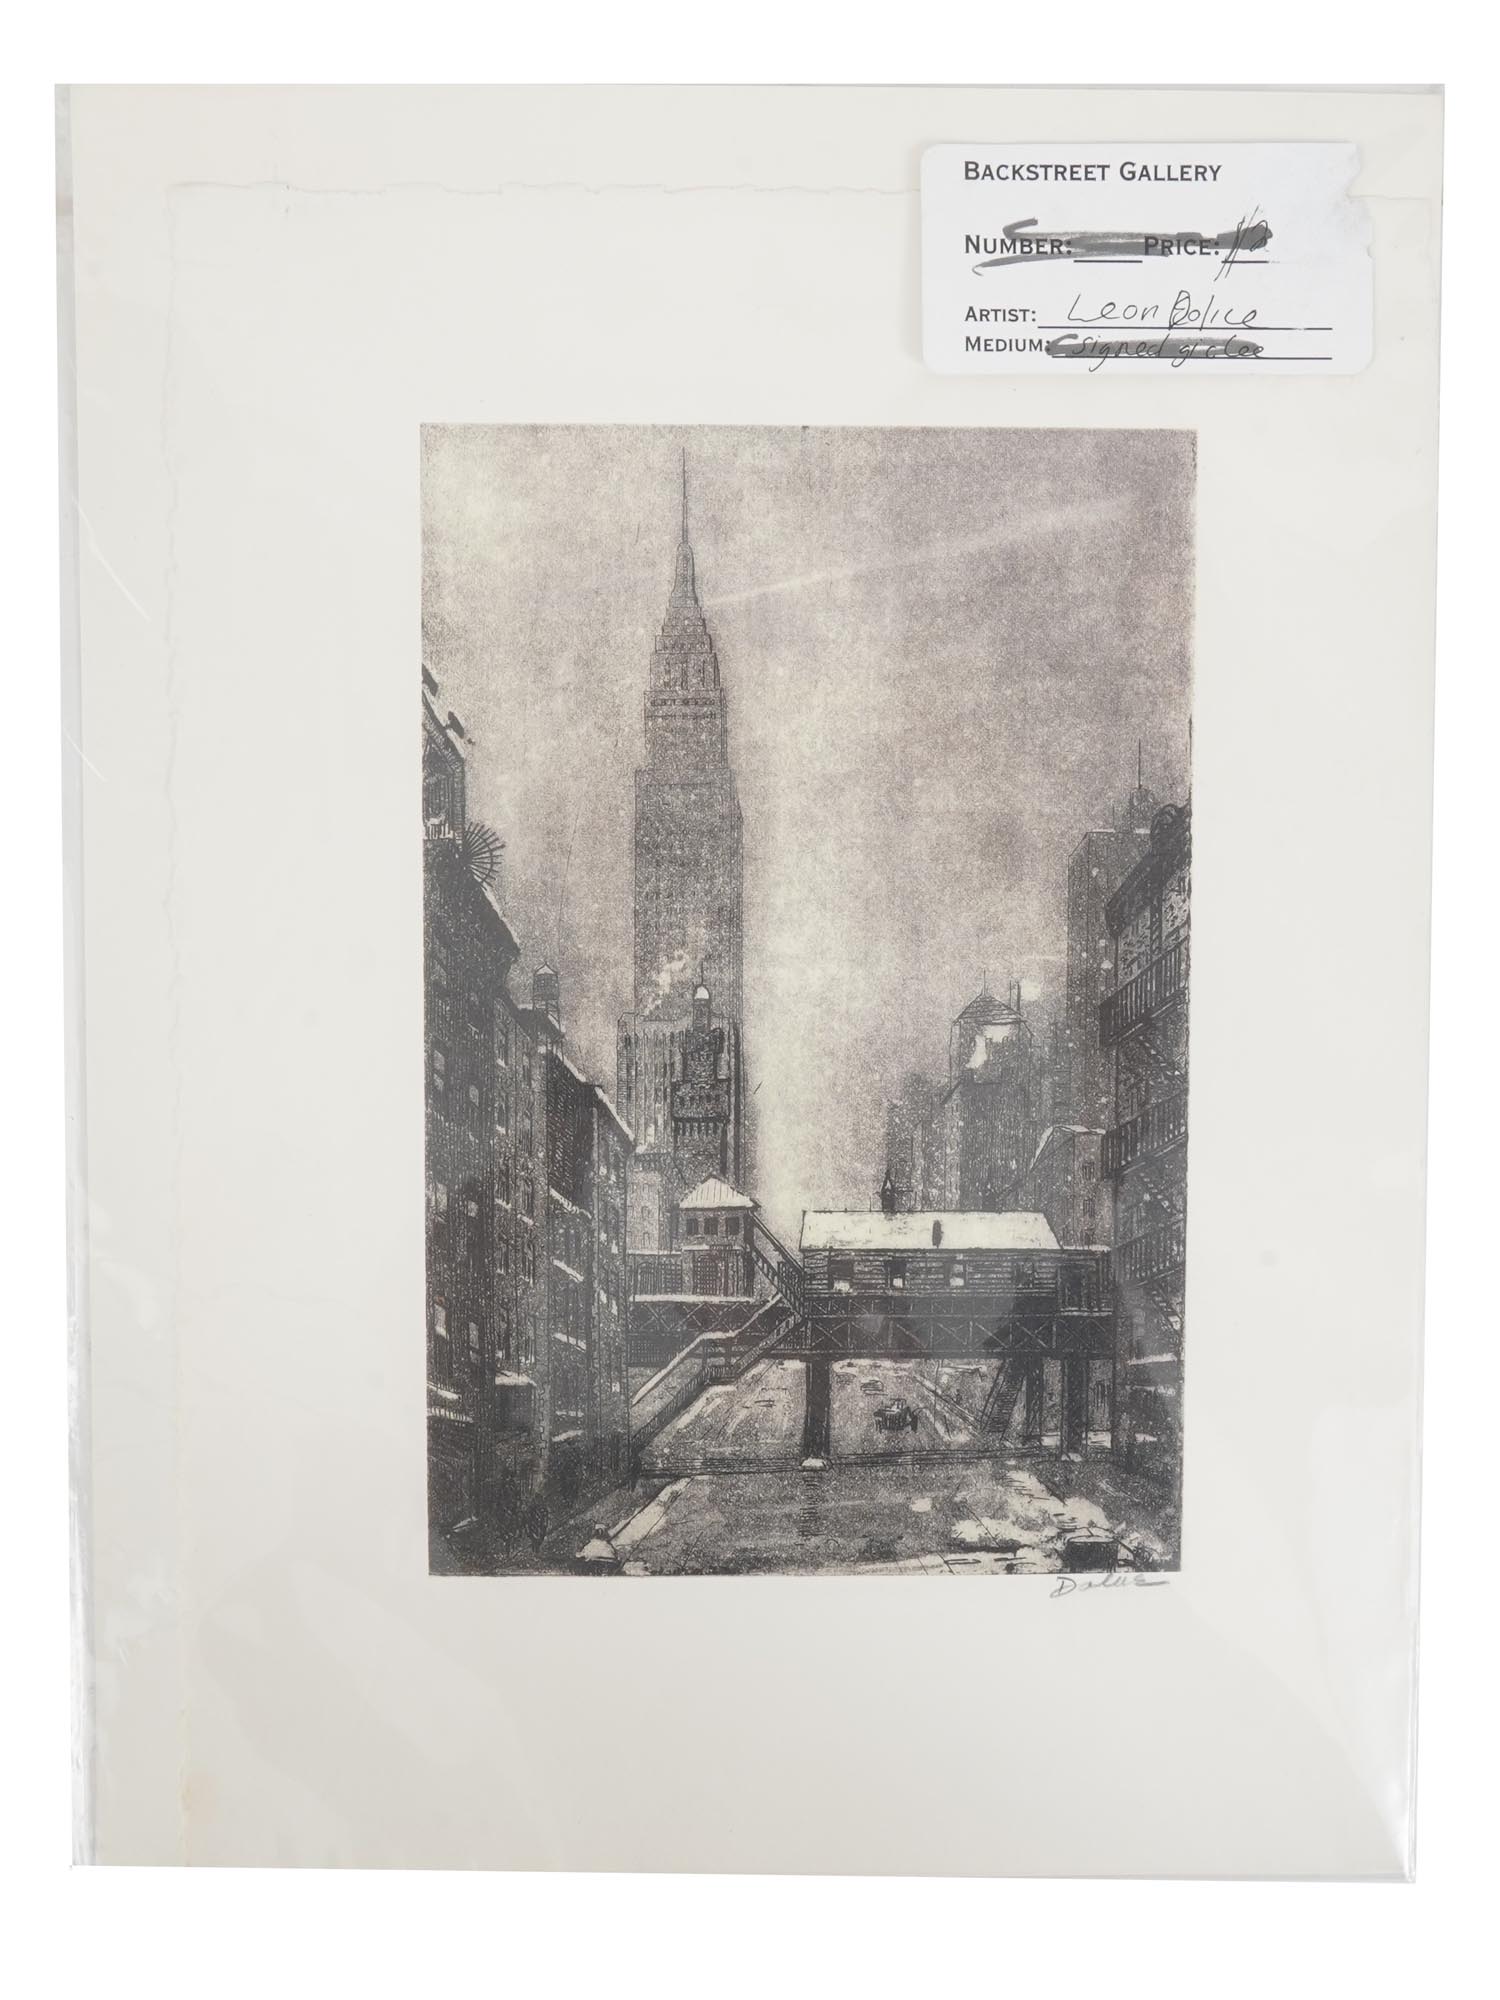 AMERICAN NEW YORK CITY ETCHING BY LEON DOLICE